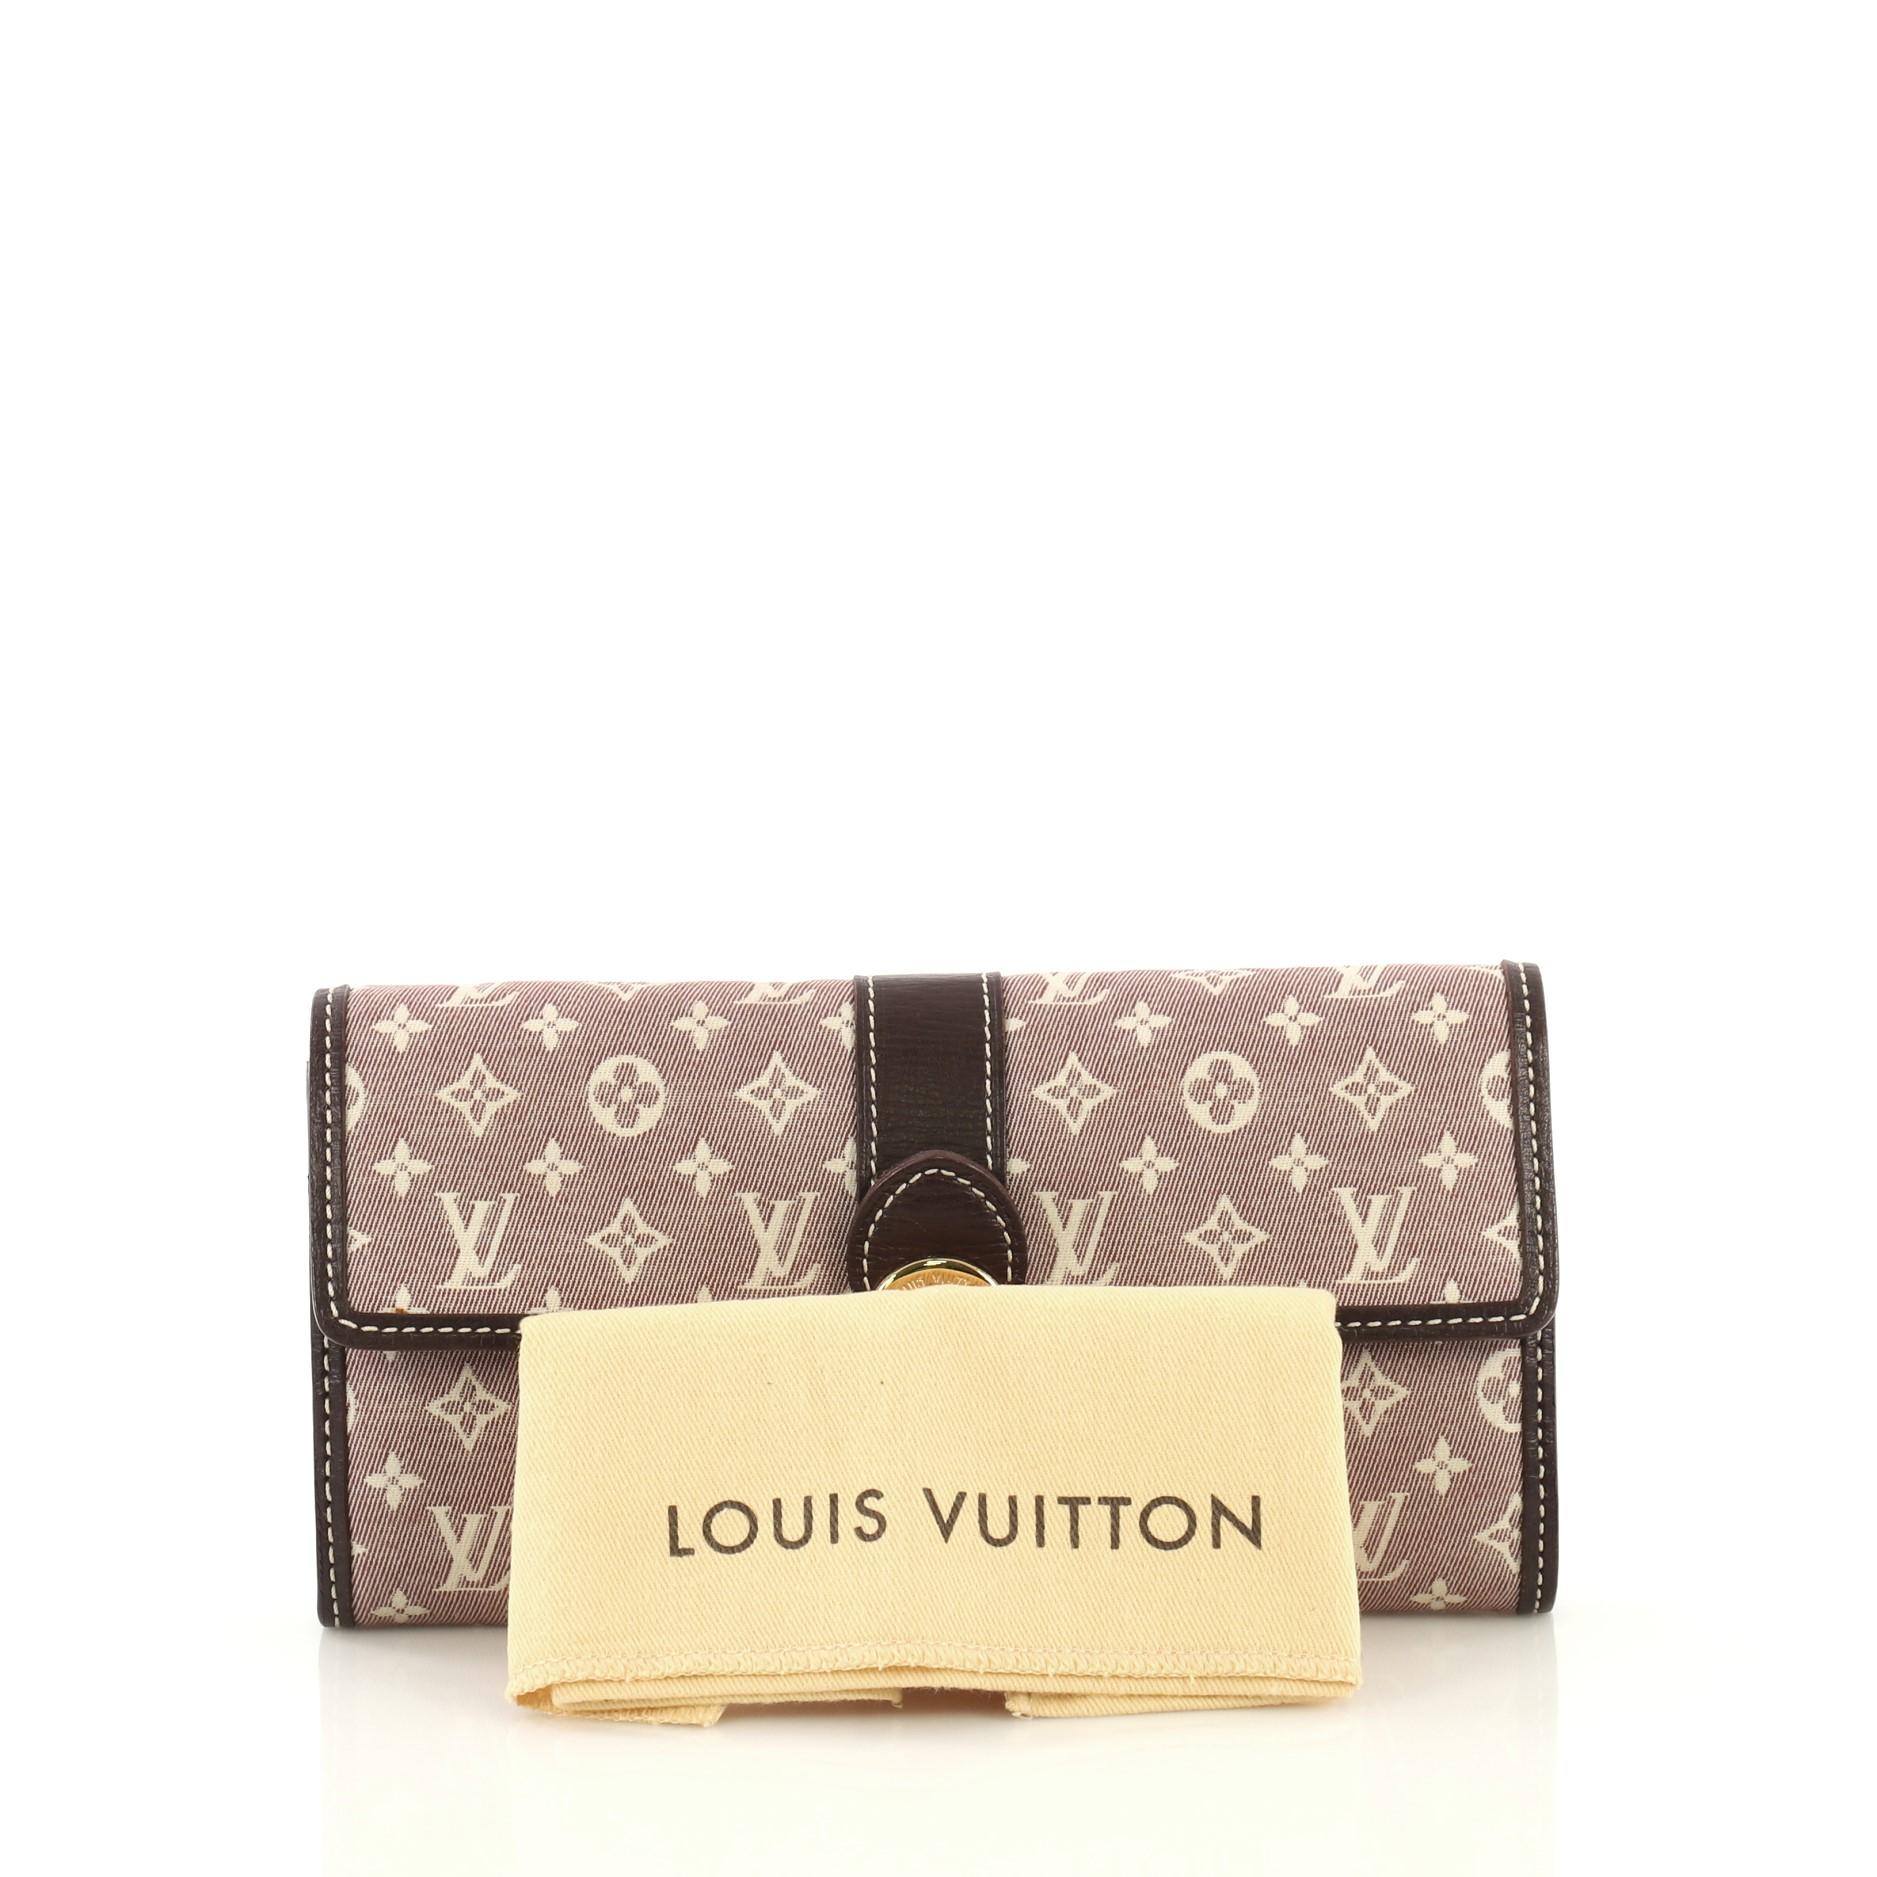 This Louis Vuitton Sarah Wallet Monogram Idylle, crafted from purple monogram idylle canvas, features leather trim and gold-tone hardware. Its press lock closure opens to a purple leather interior with multiple card slots and zip and slip pockets.